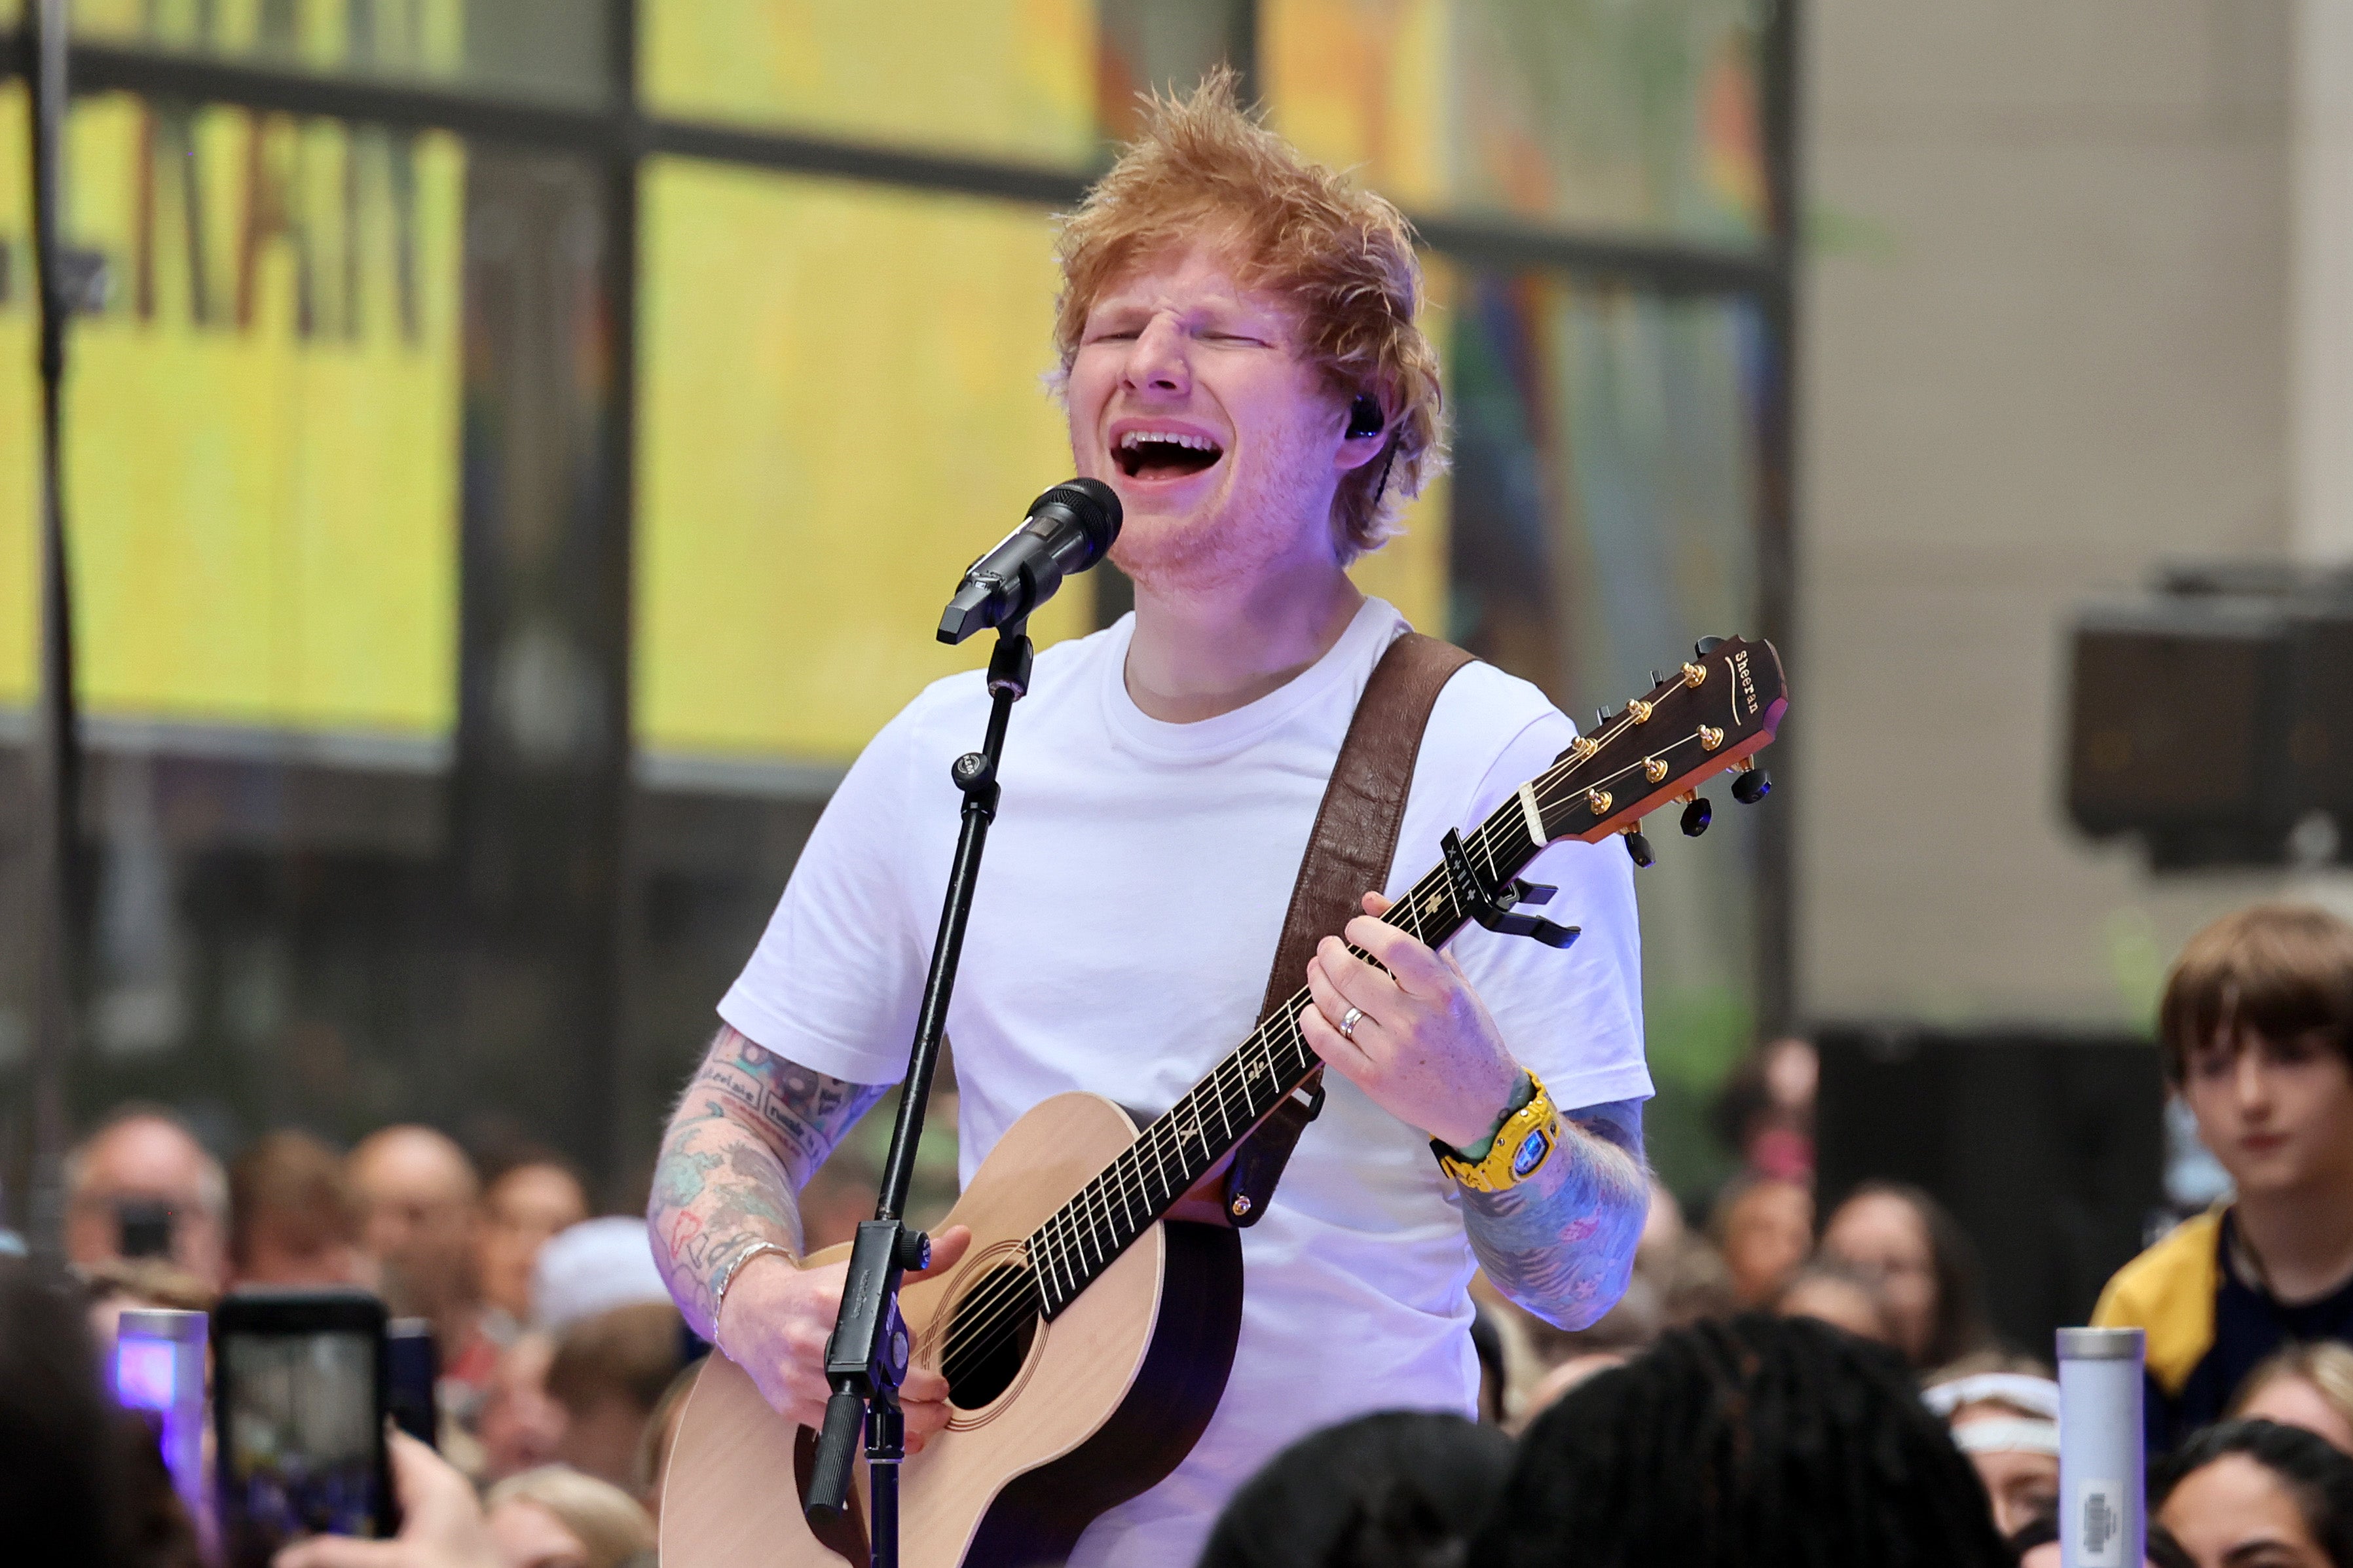 Ed Sheeran paid £39.6m in tax, according to The Times